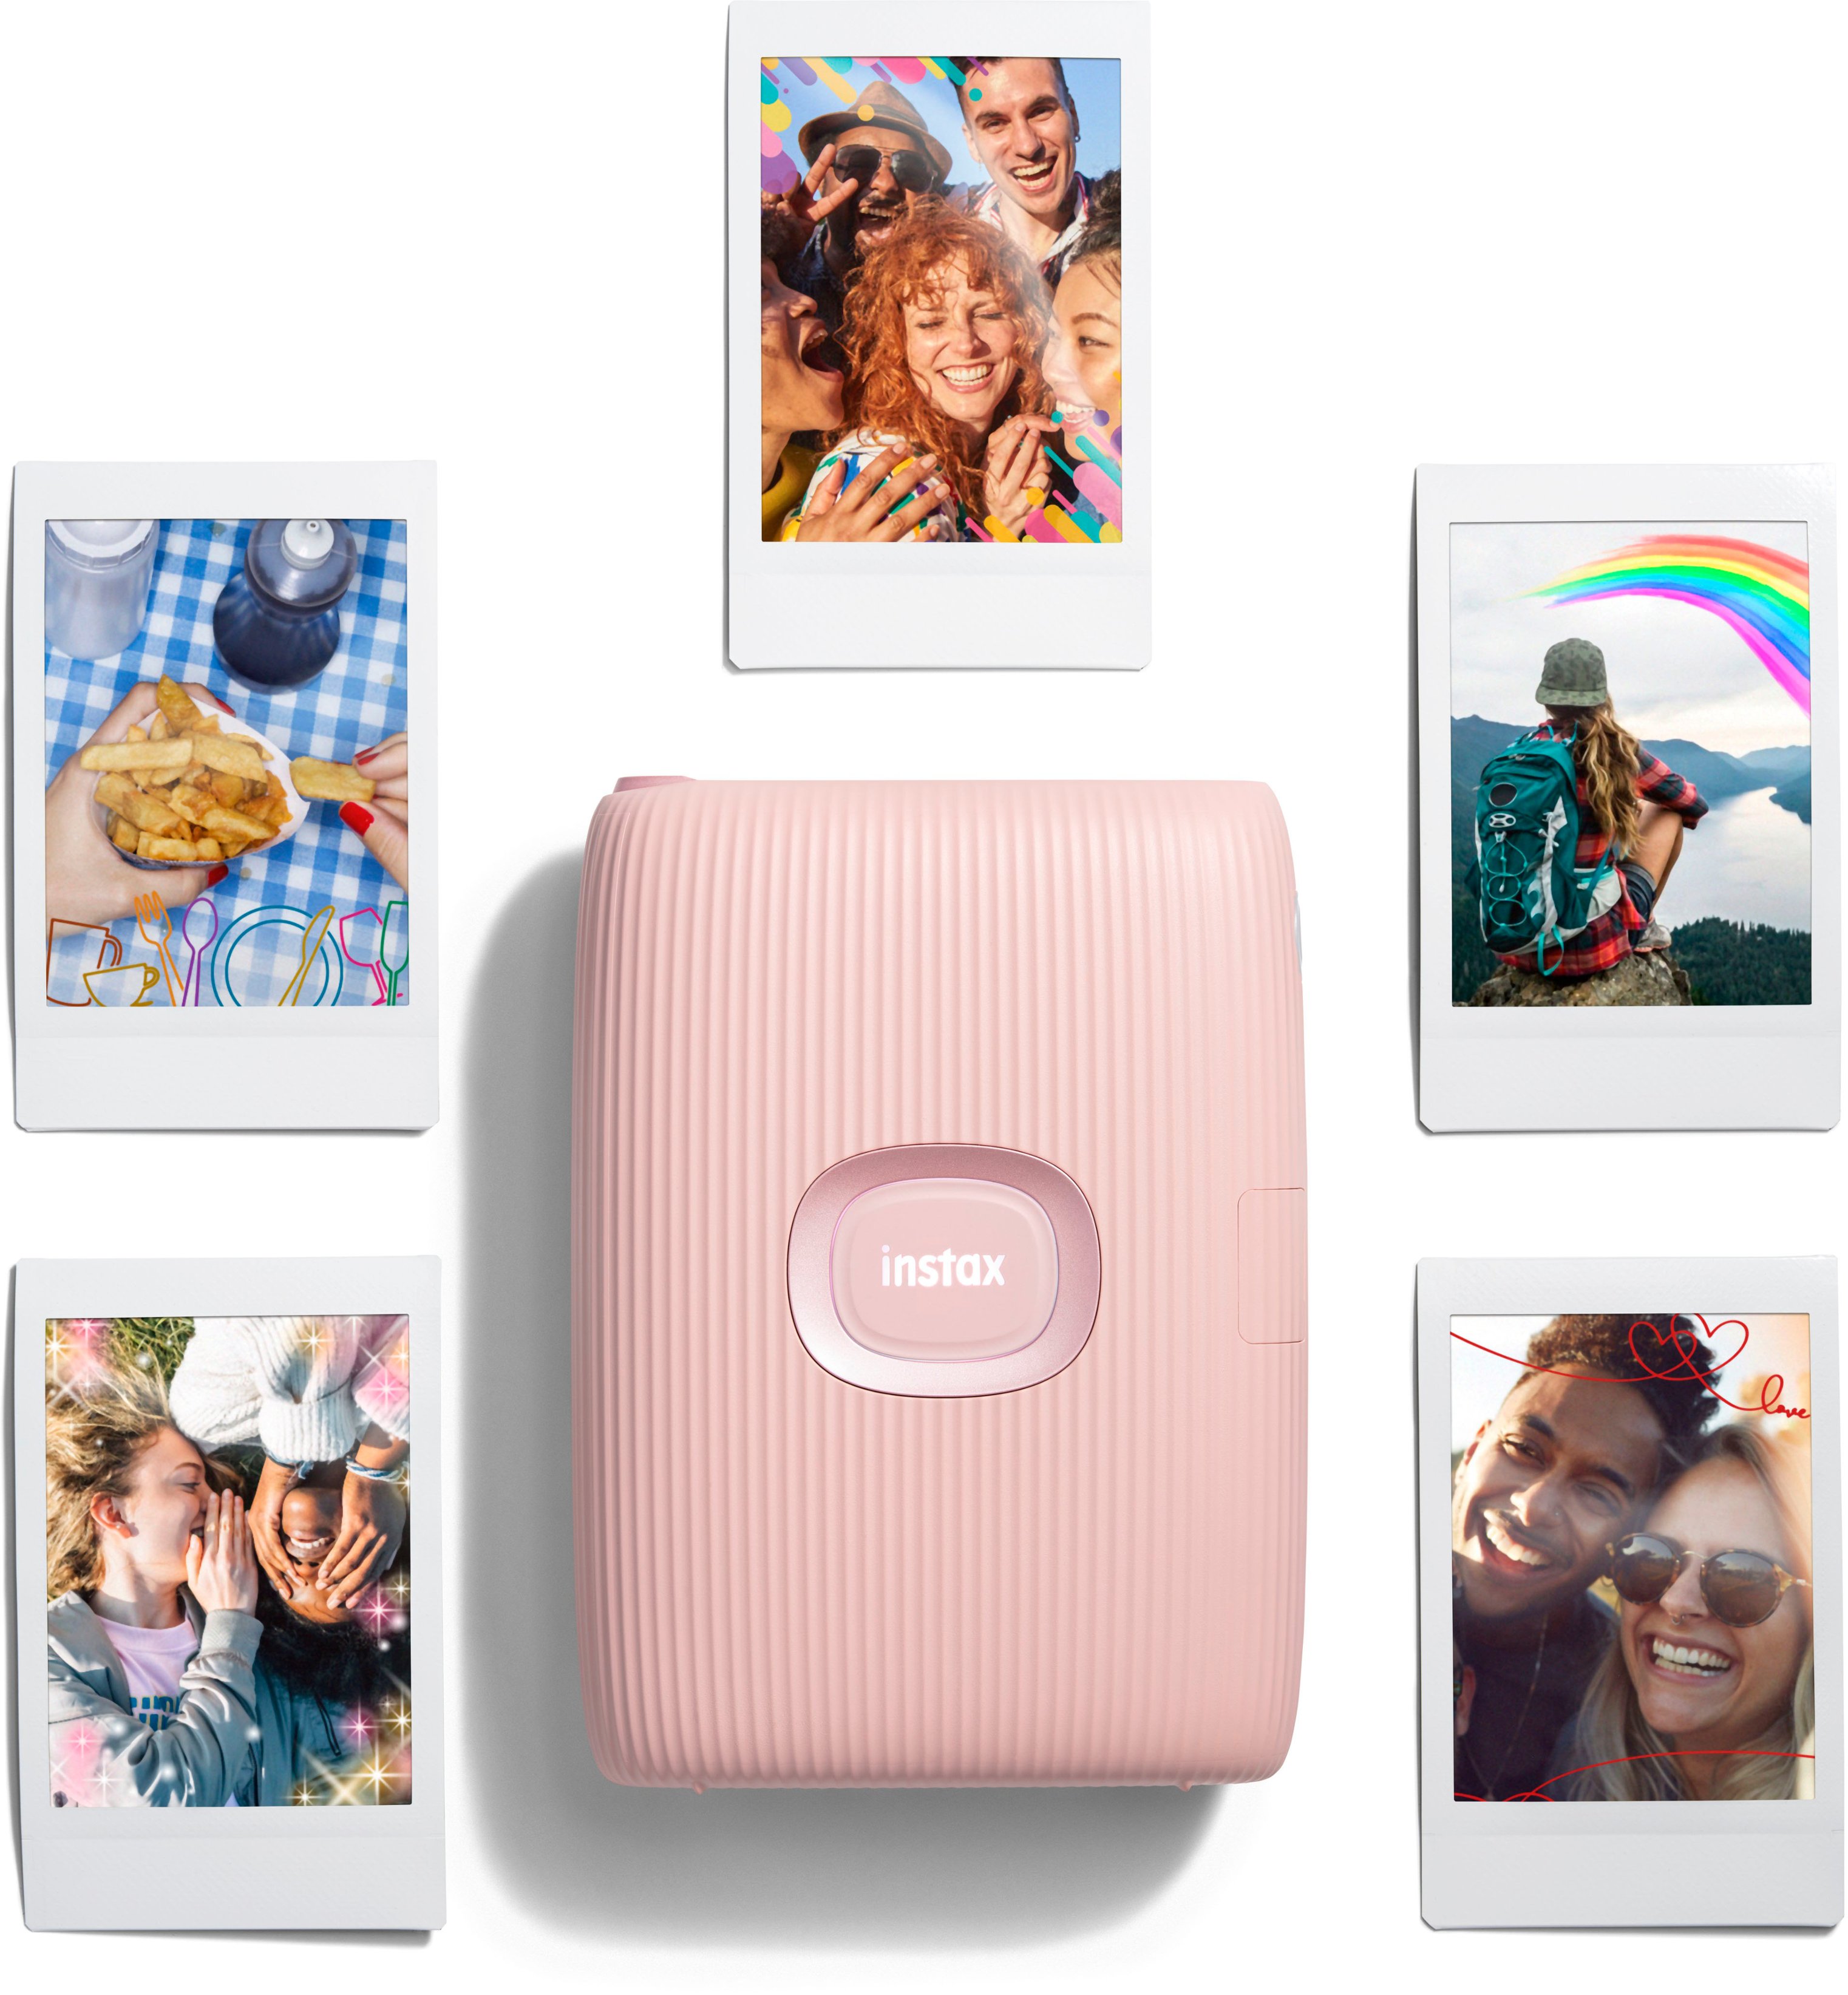 Fujifilm Instax Pal review – probably not your new BFF